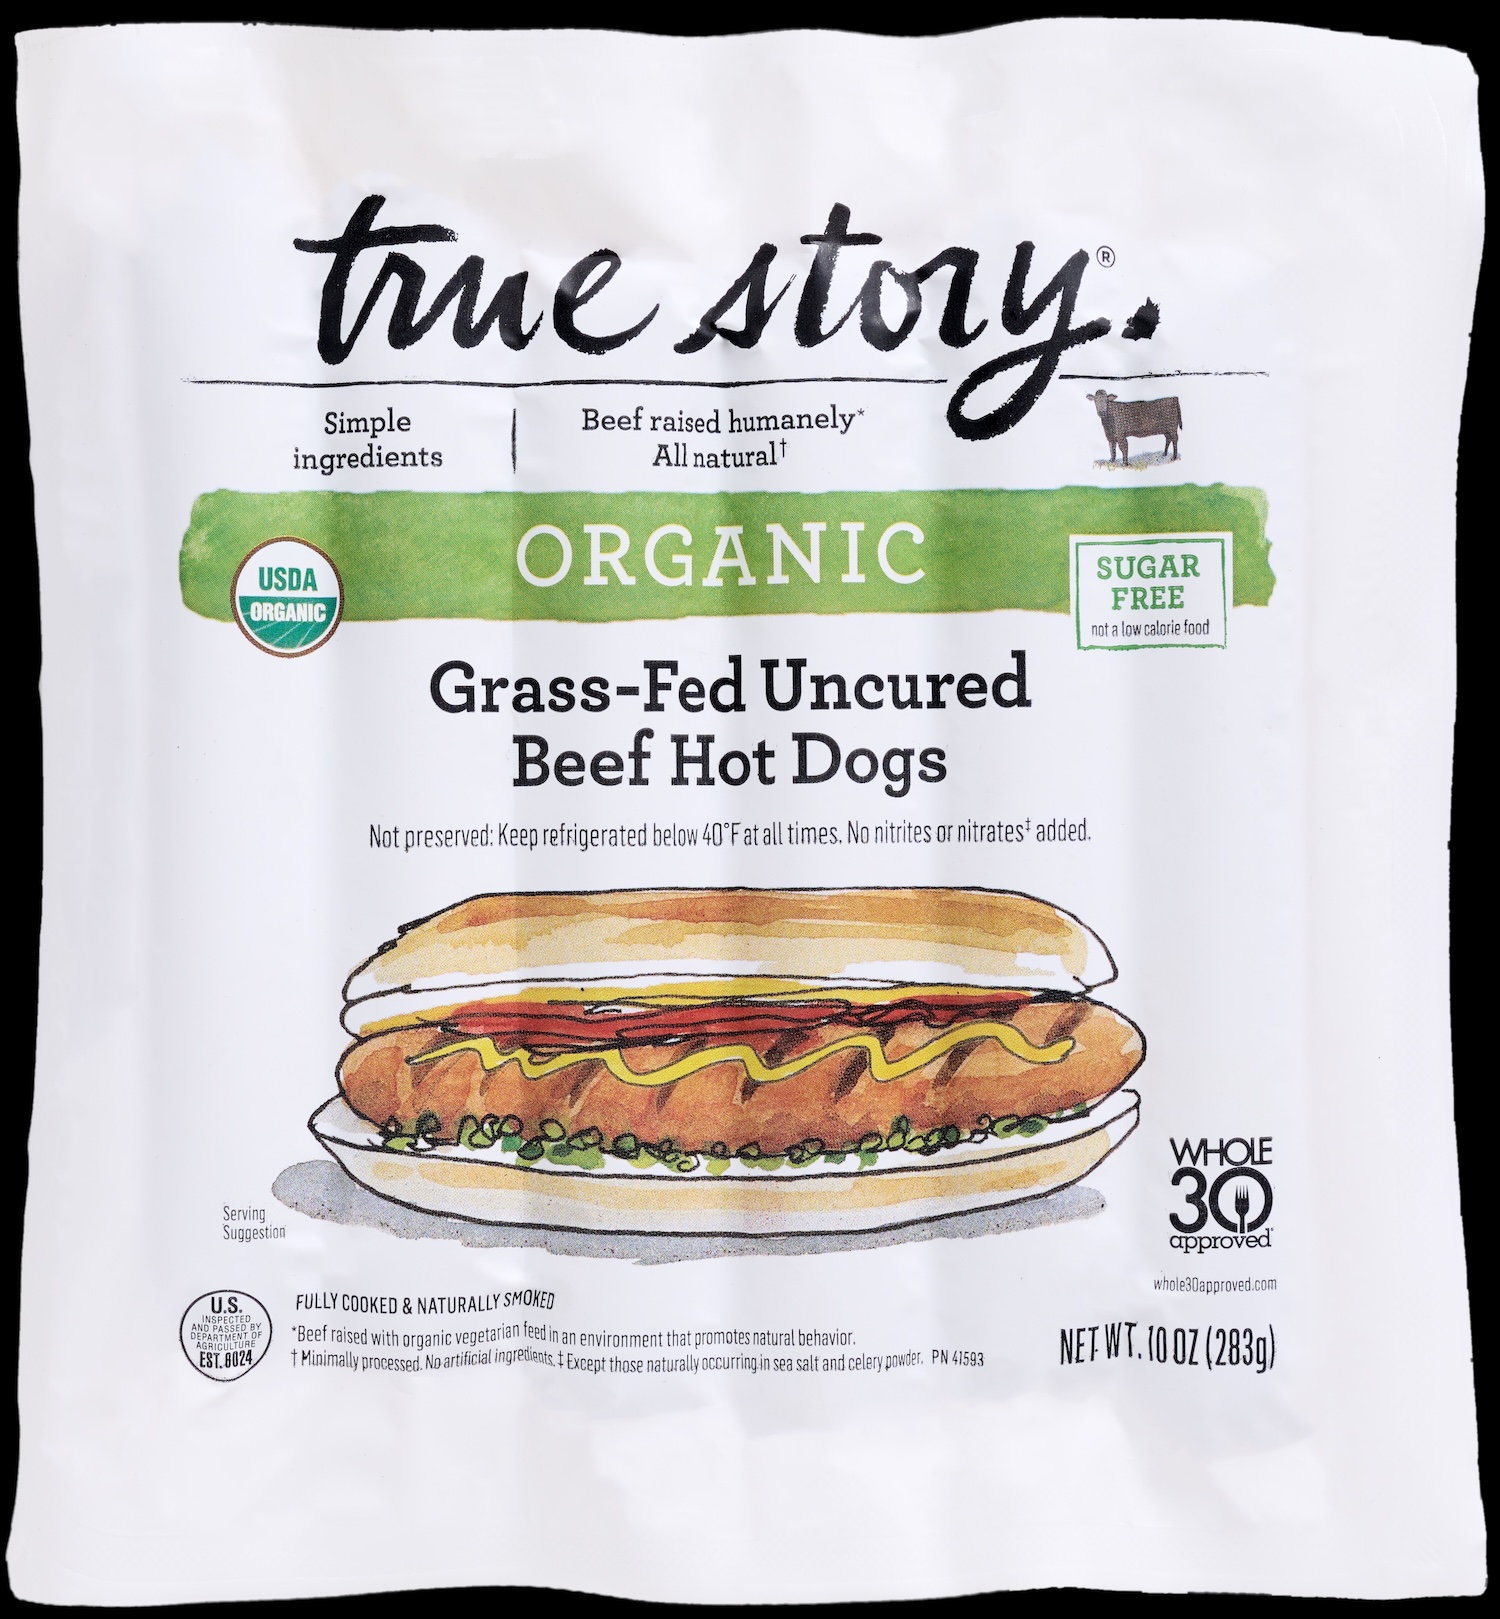 Organic Grass-Fed Uncured Beef Hot Dogs Product Packaging